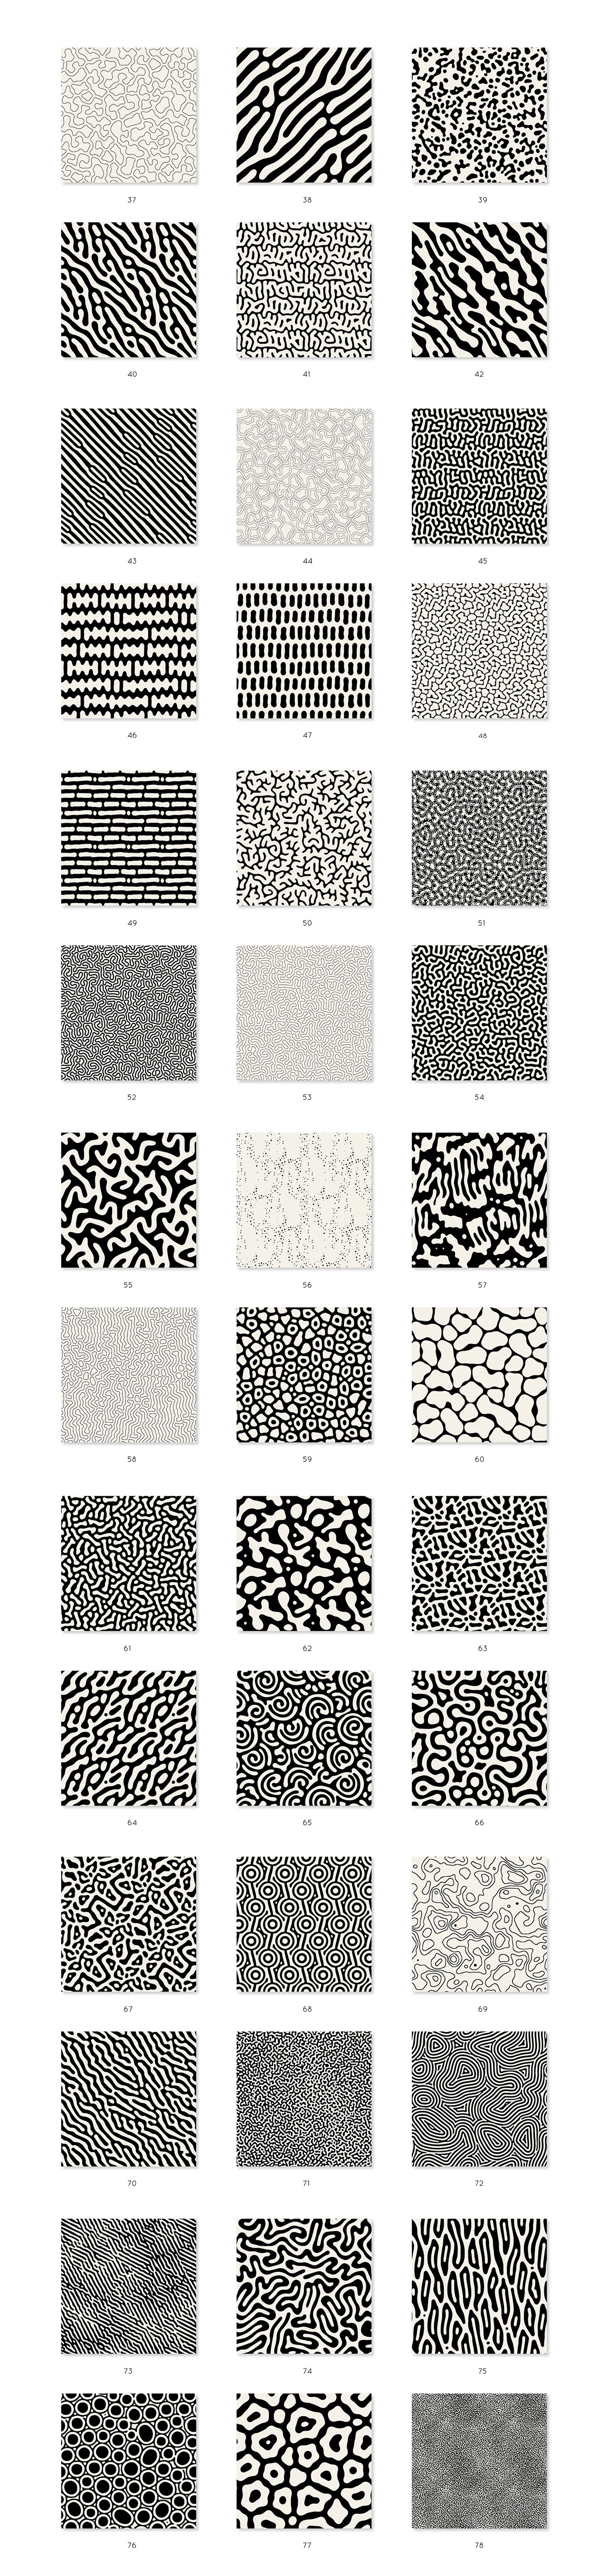 78 seamless organic patterns made as vector files for any kind of graphic design project.